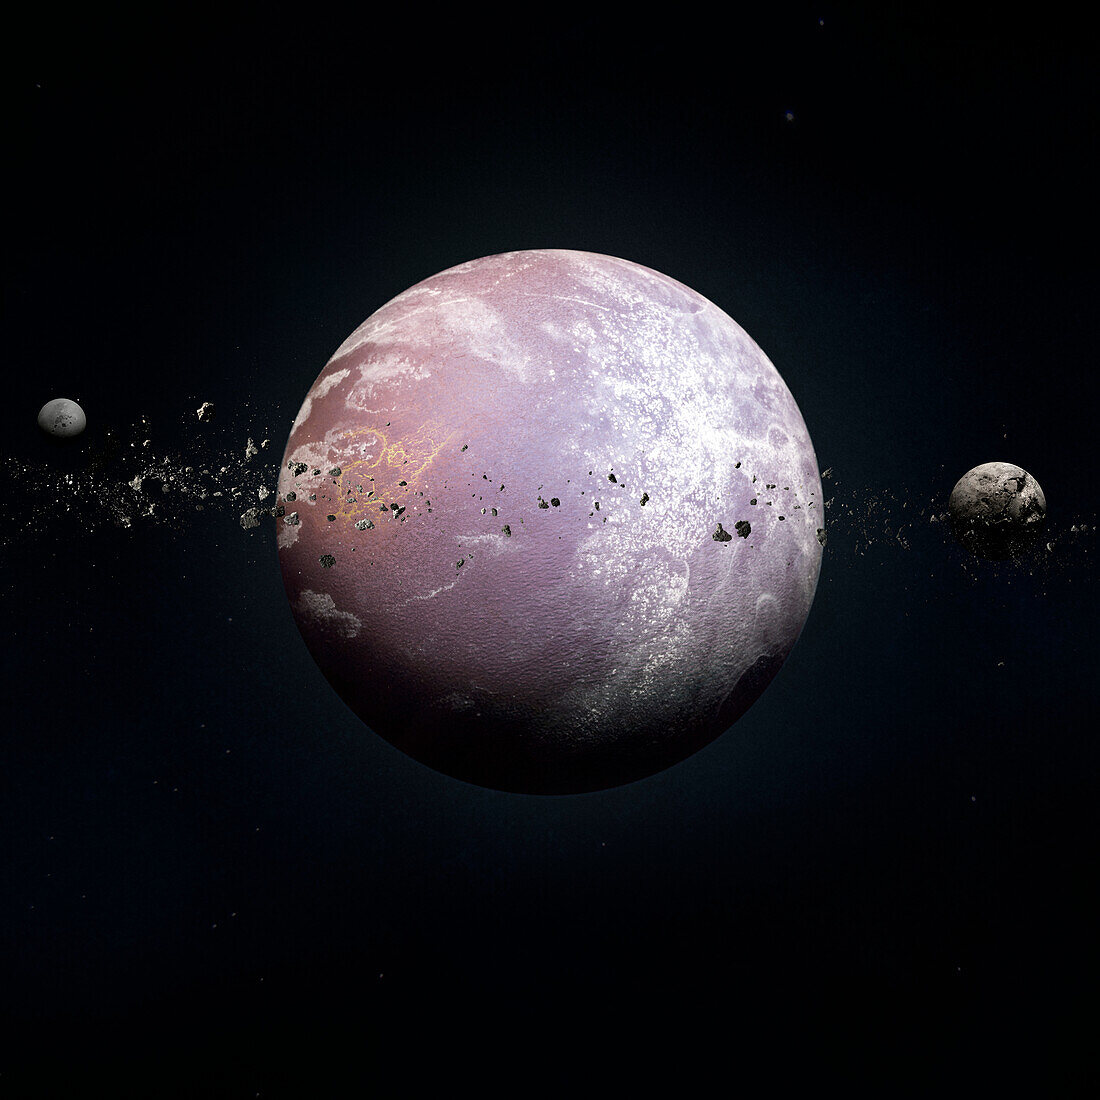 Exoplanet with moons and debris, composite image